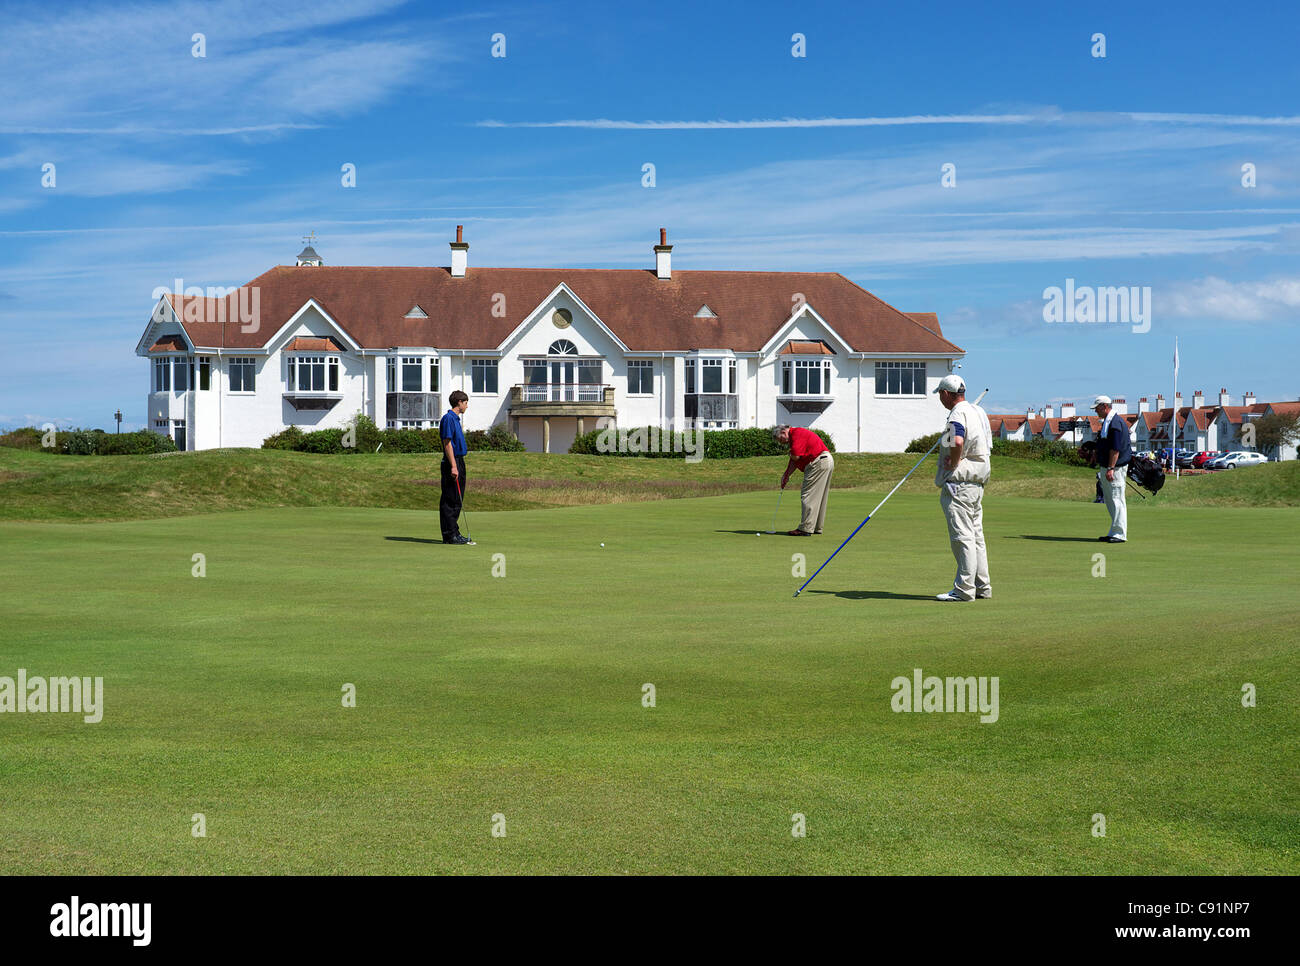 Golfers and caddies on the 18th green at the Ailsa Course, Turnberry, Ayrshire, Scotland. Clubhouse in the background. Stock Photo